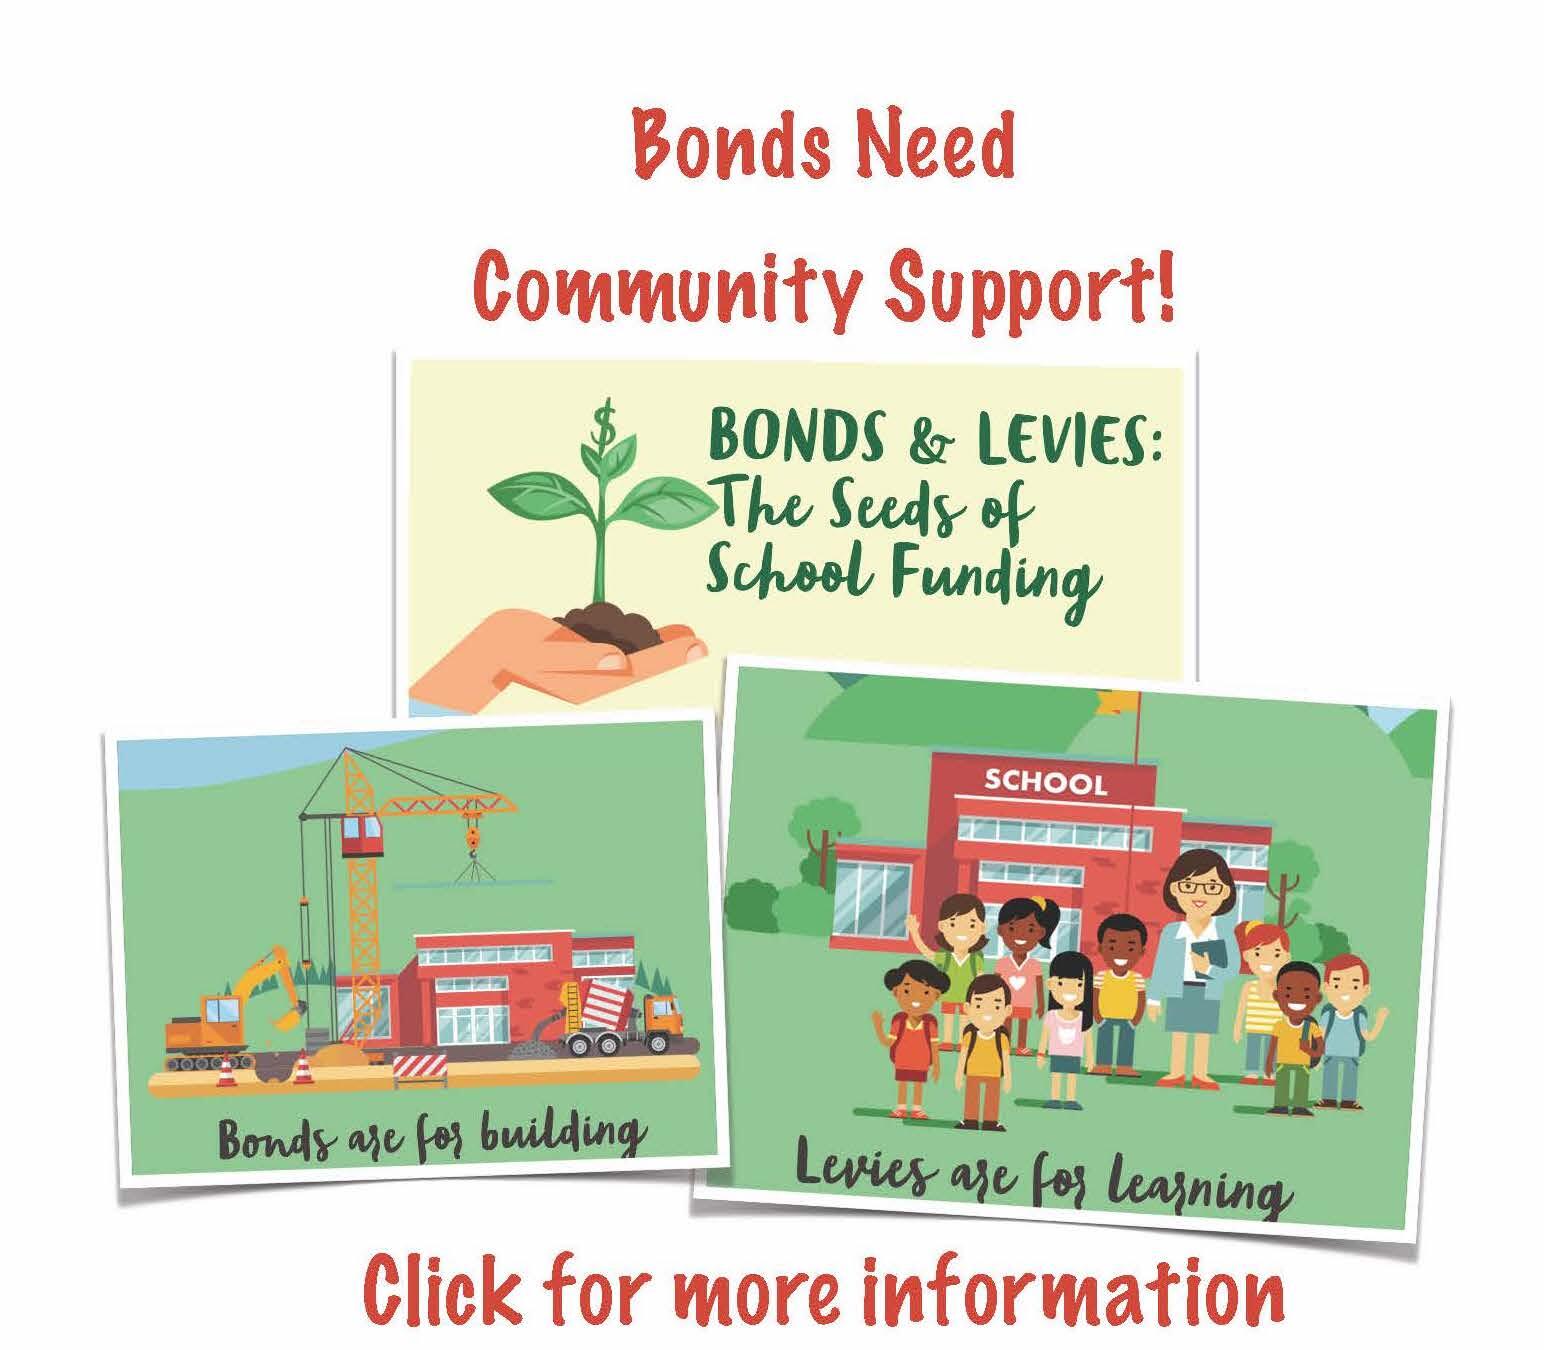 Get more information on how bonds help support your schools!